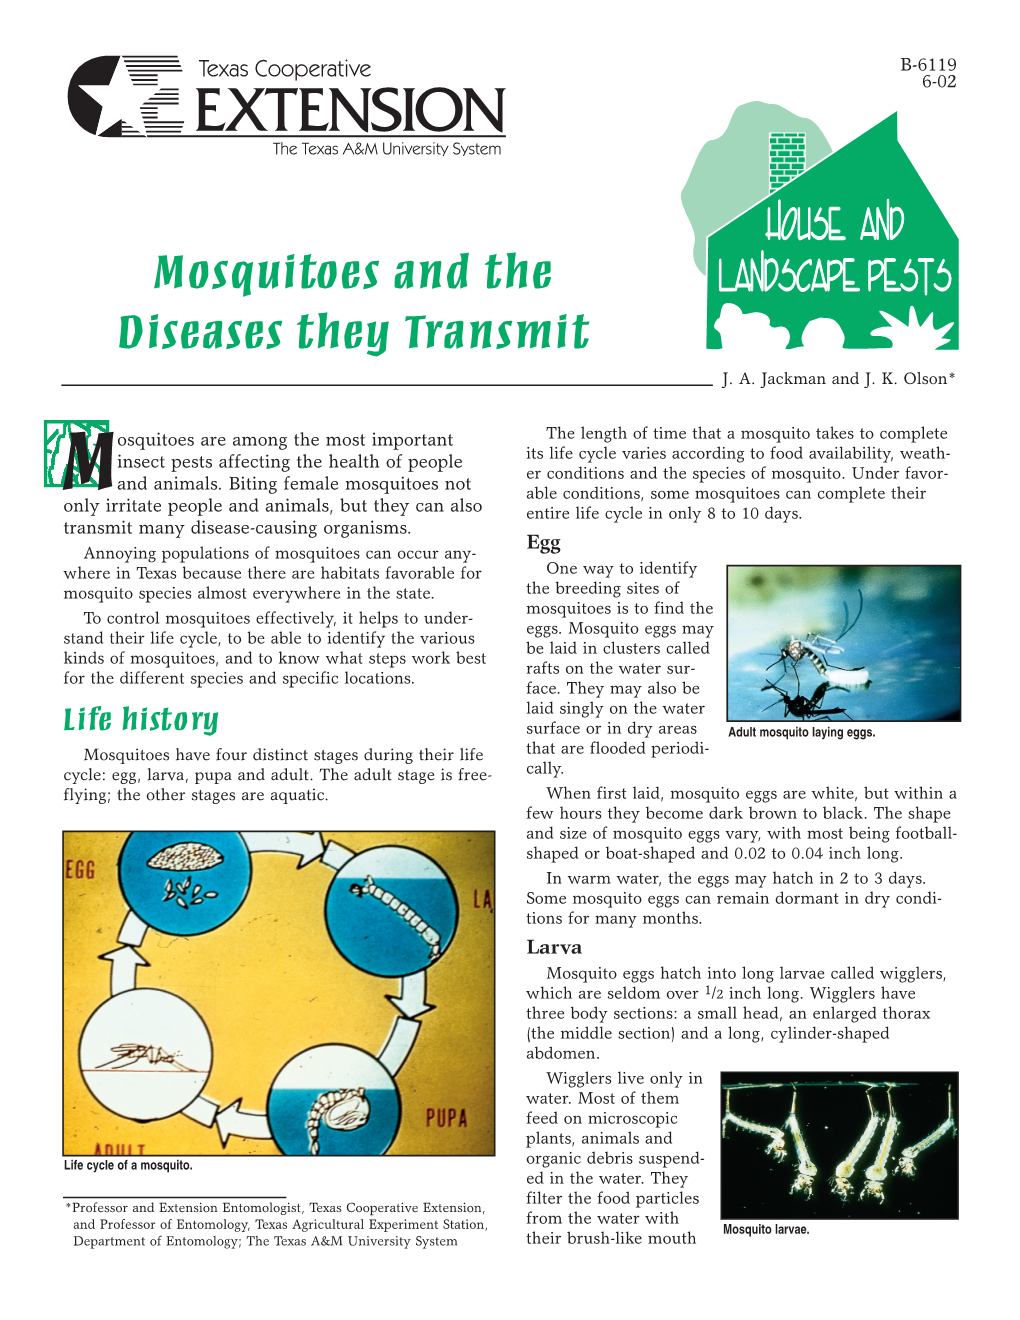 Mosquitos and the Diseases They Transmit